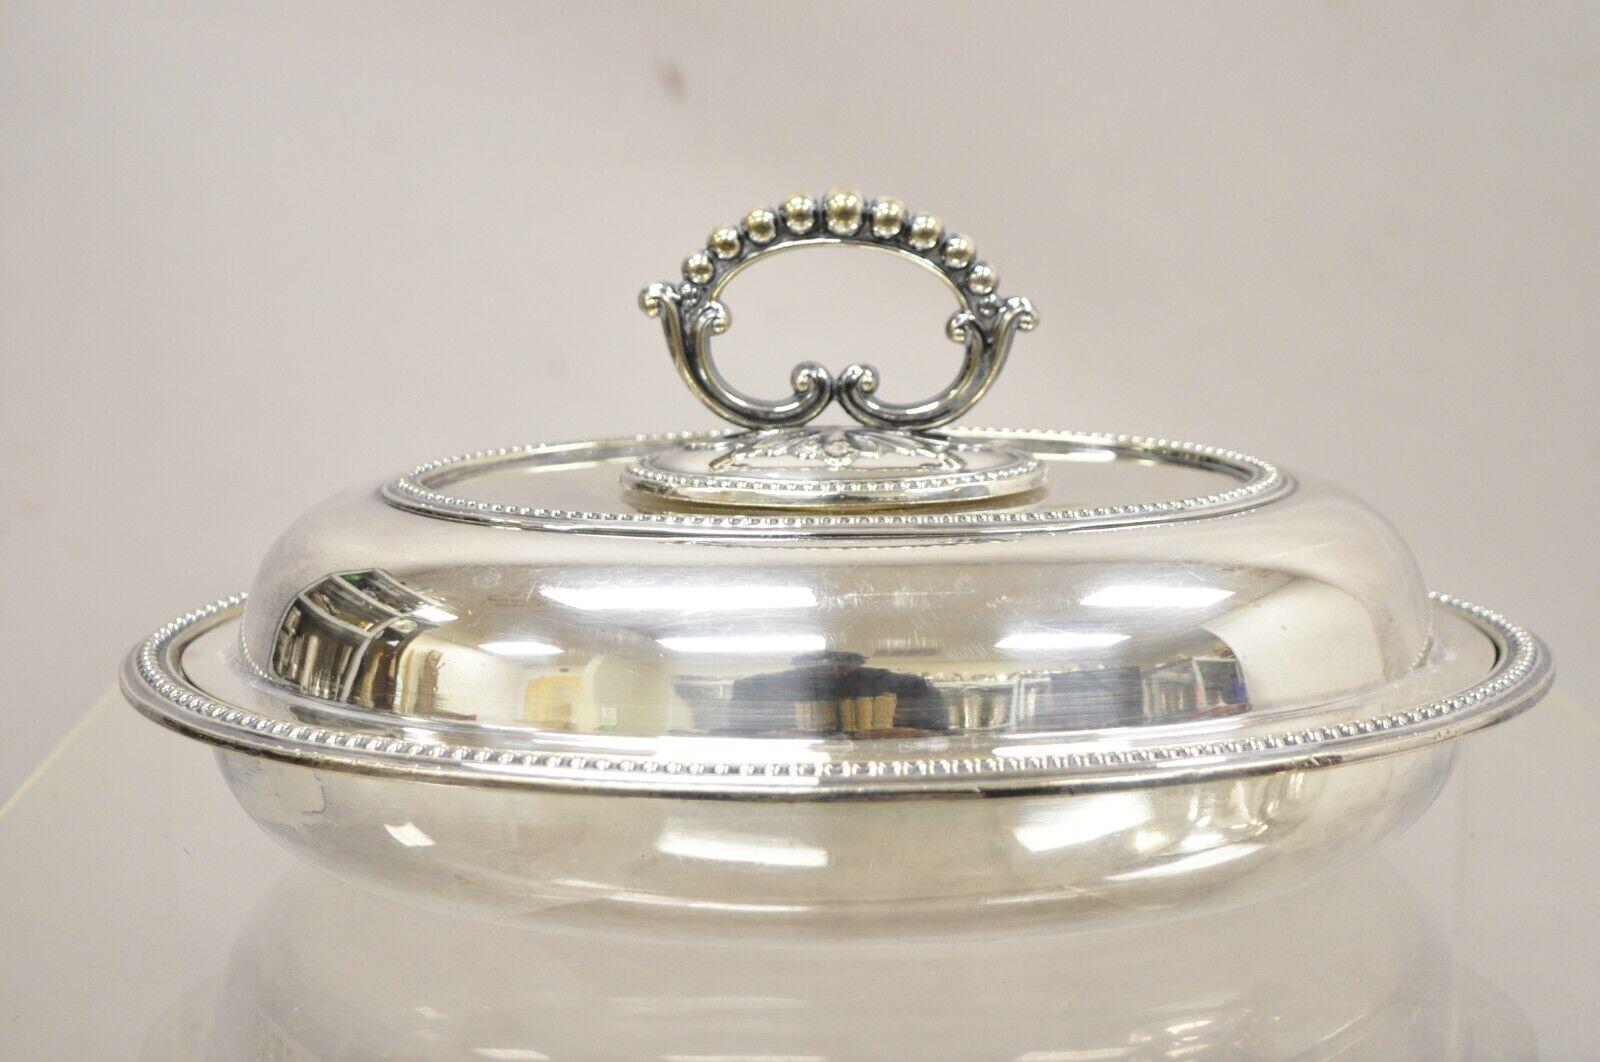 Mappin & Webb's Prince's Plate English Sheffield Silver Plated Covered Dish (Plat couvert en argent) en vente 3